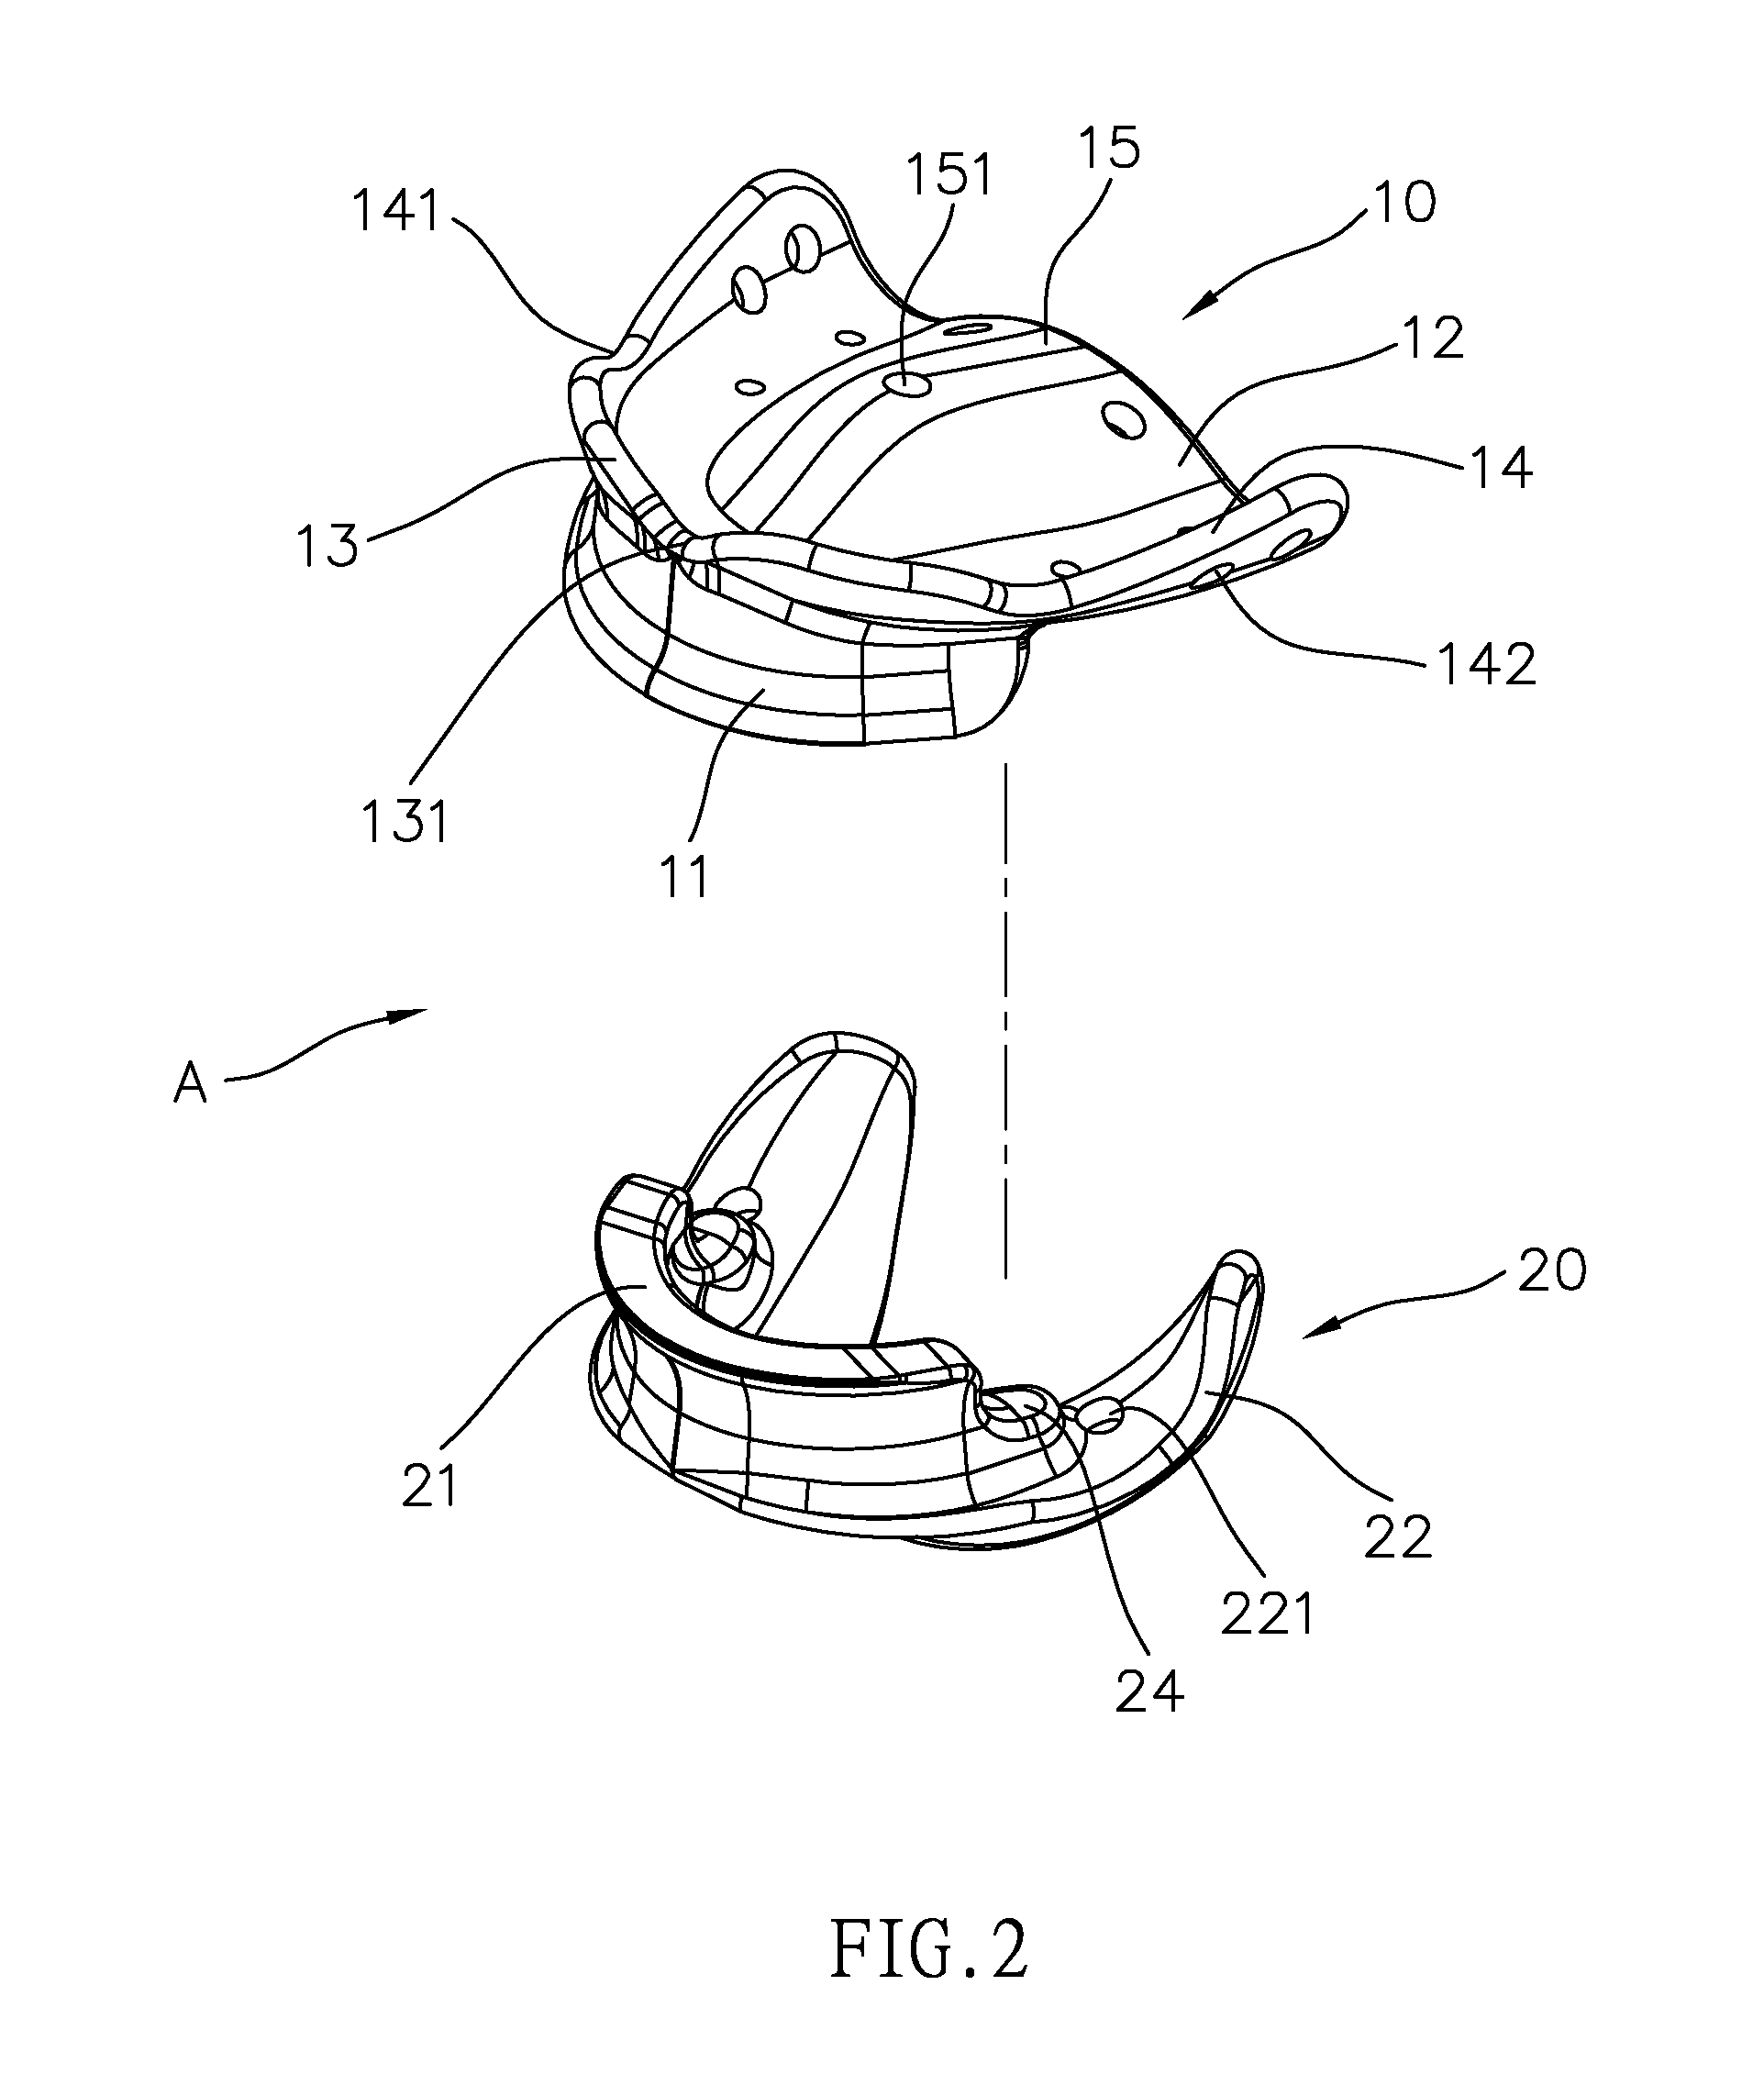 Method and apparatus of full mouth reconstruction